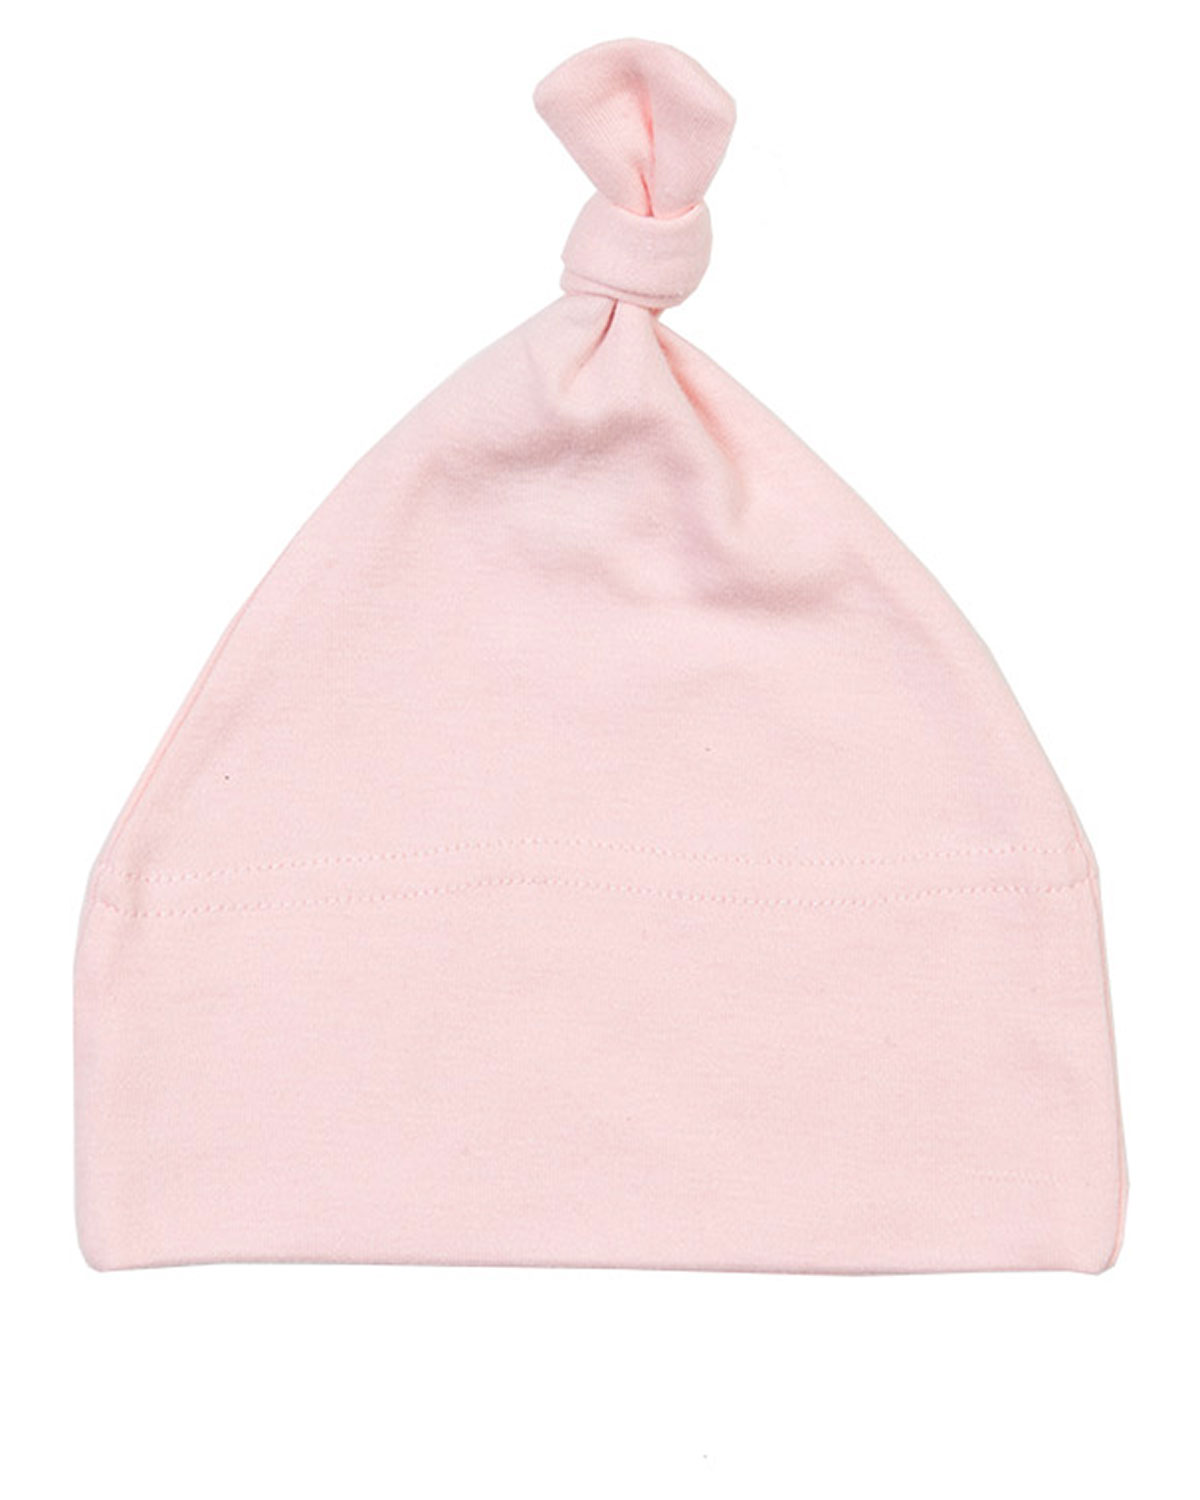 Baby 1 Knot Hat Powder Pink One Size